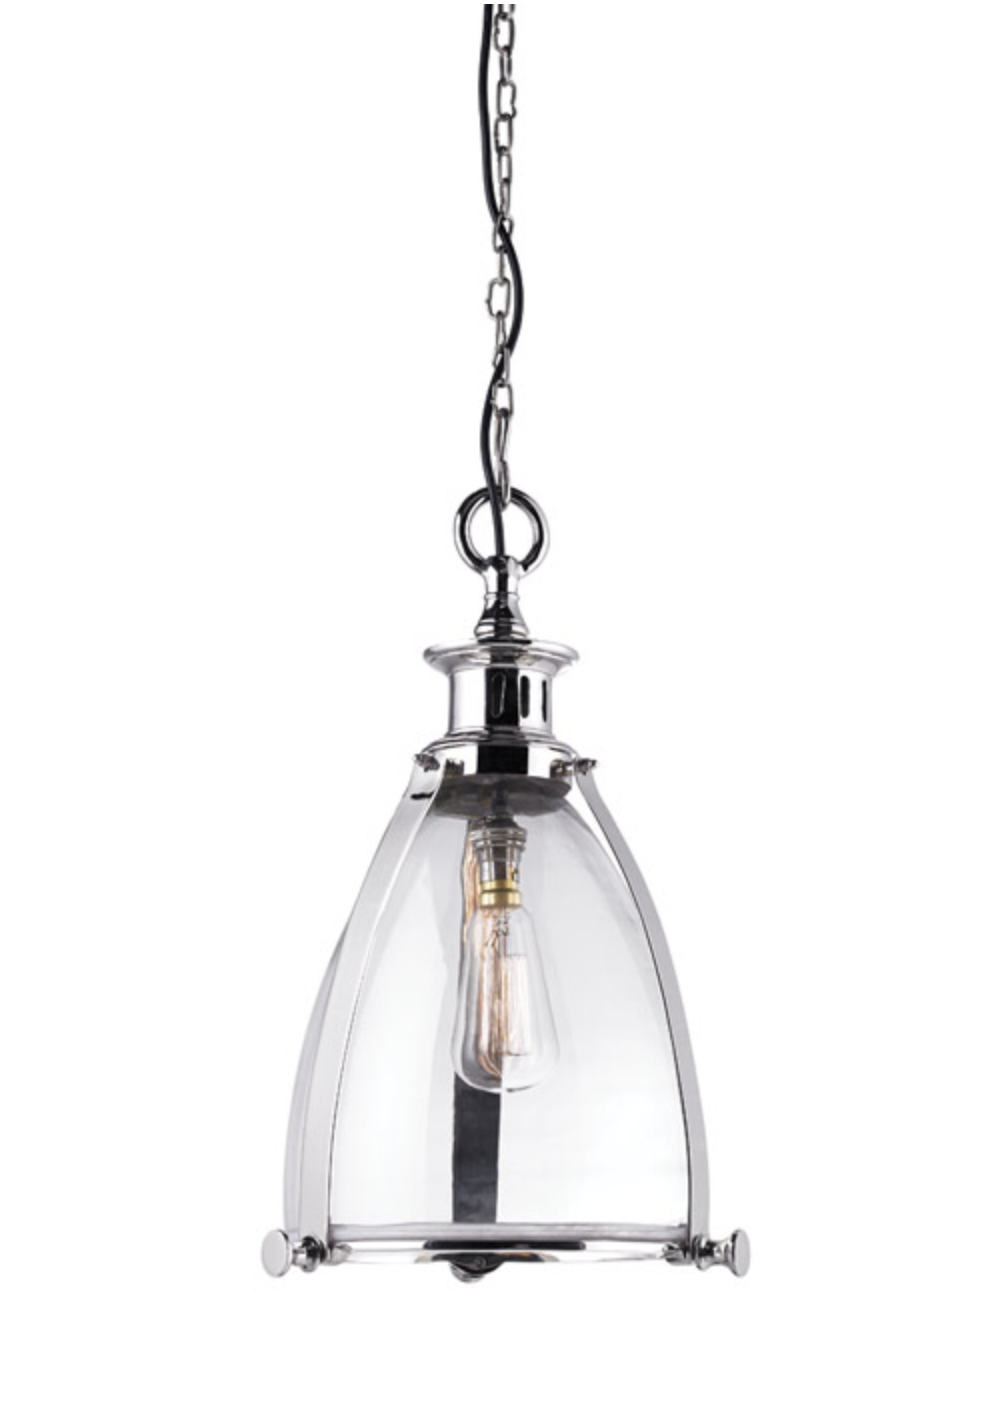 Stor Large Polished Nickel Bell Pendant - ID 5638